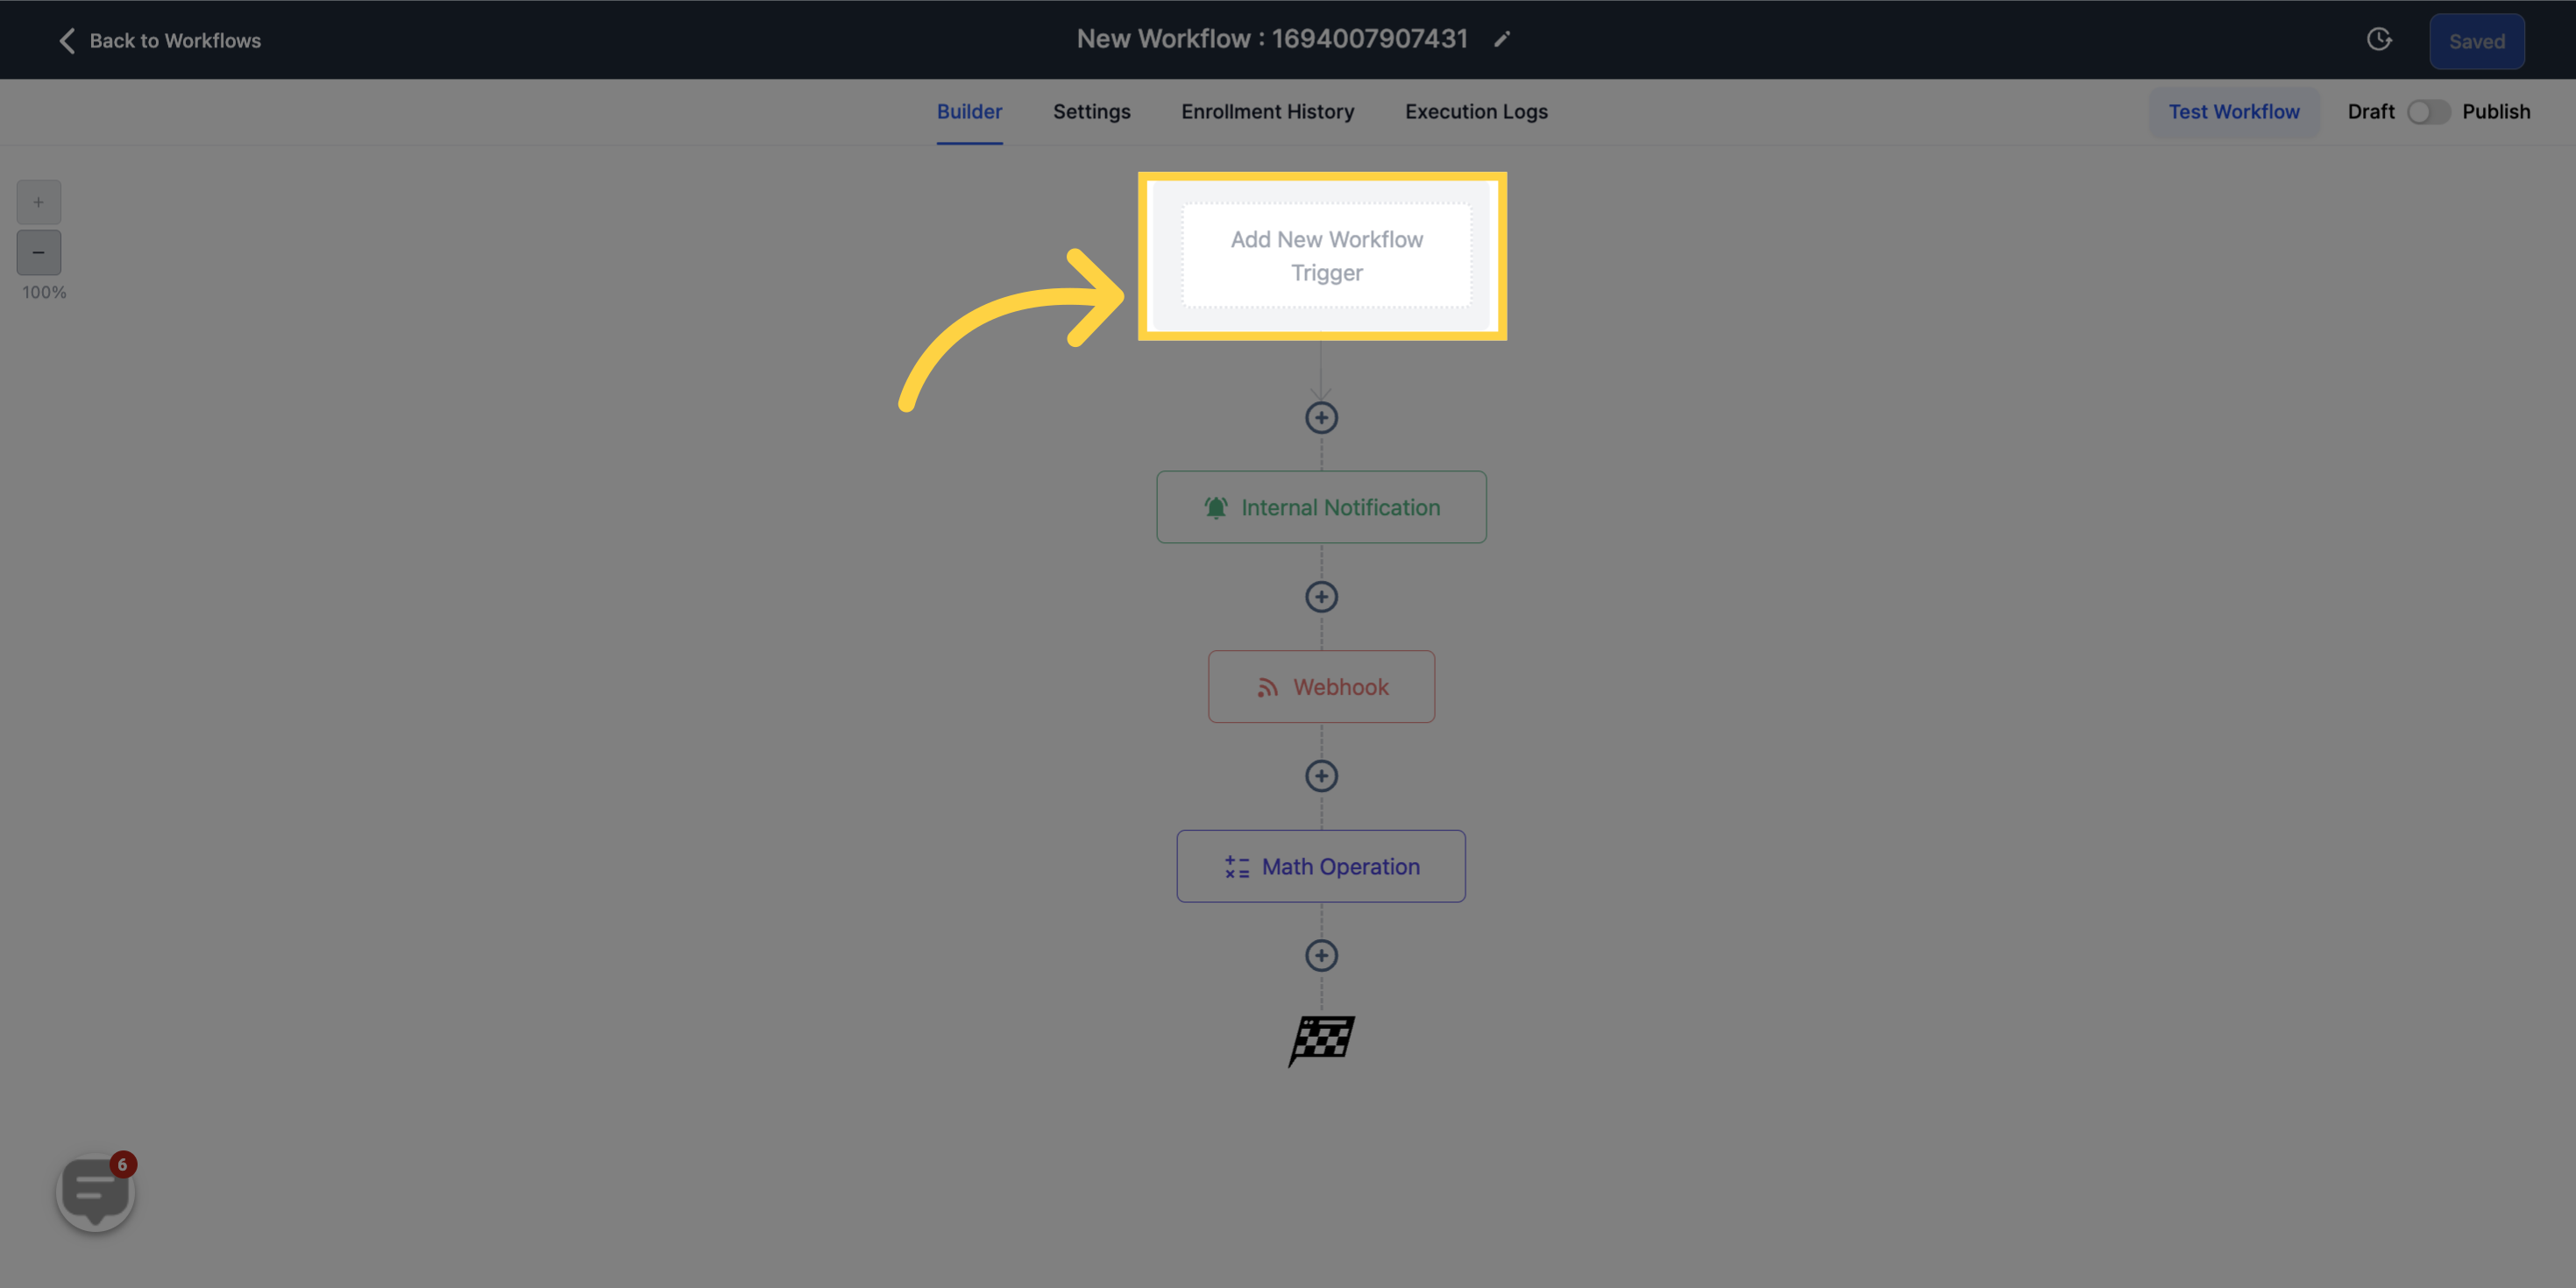 Click 'Add New Workflow Trigger'